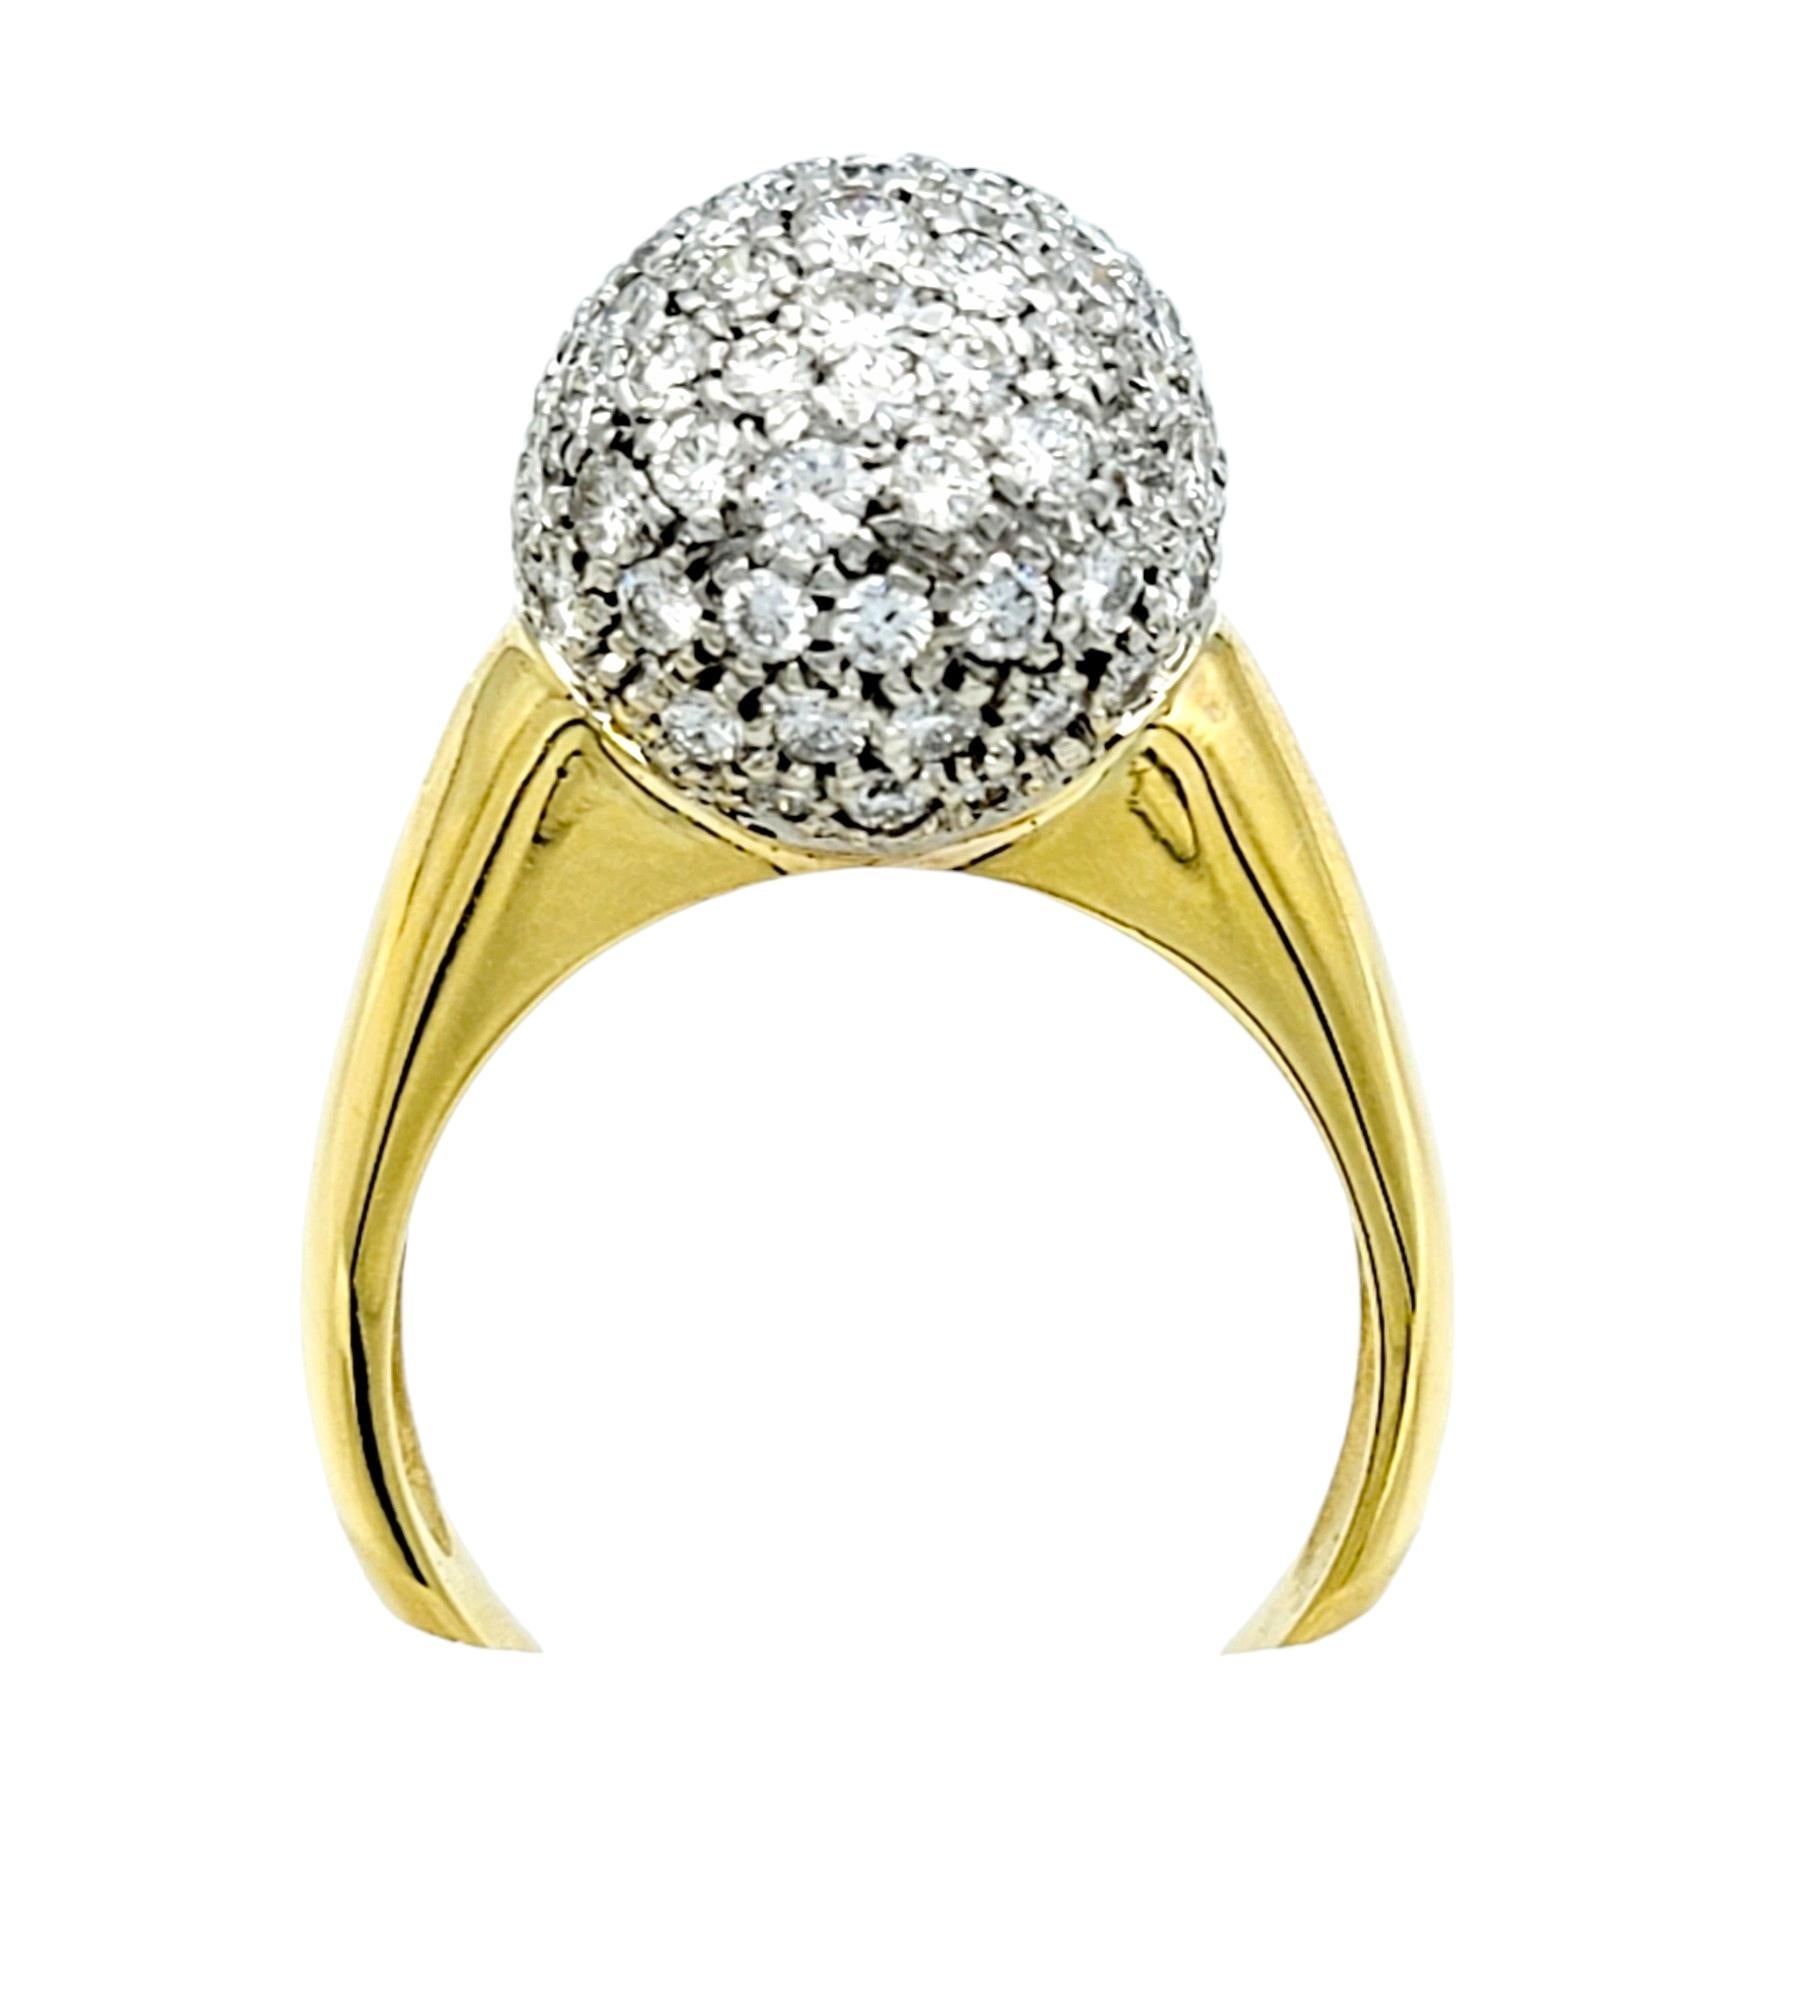 2.00 Carat Total Pave Diamond Clustered Dome Ring 18 Karat Yellow Gold, F-G / VS In Good Condition For Sale In Scottsdale, AZ